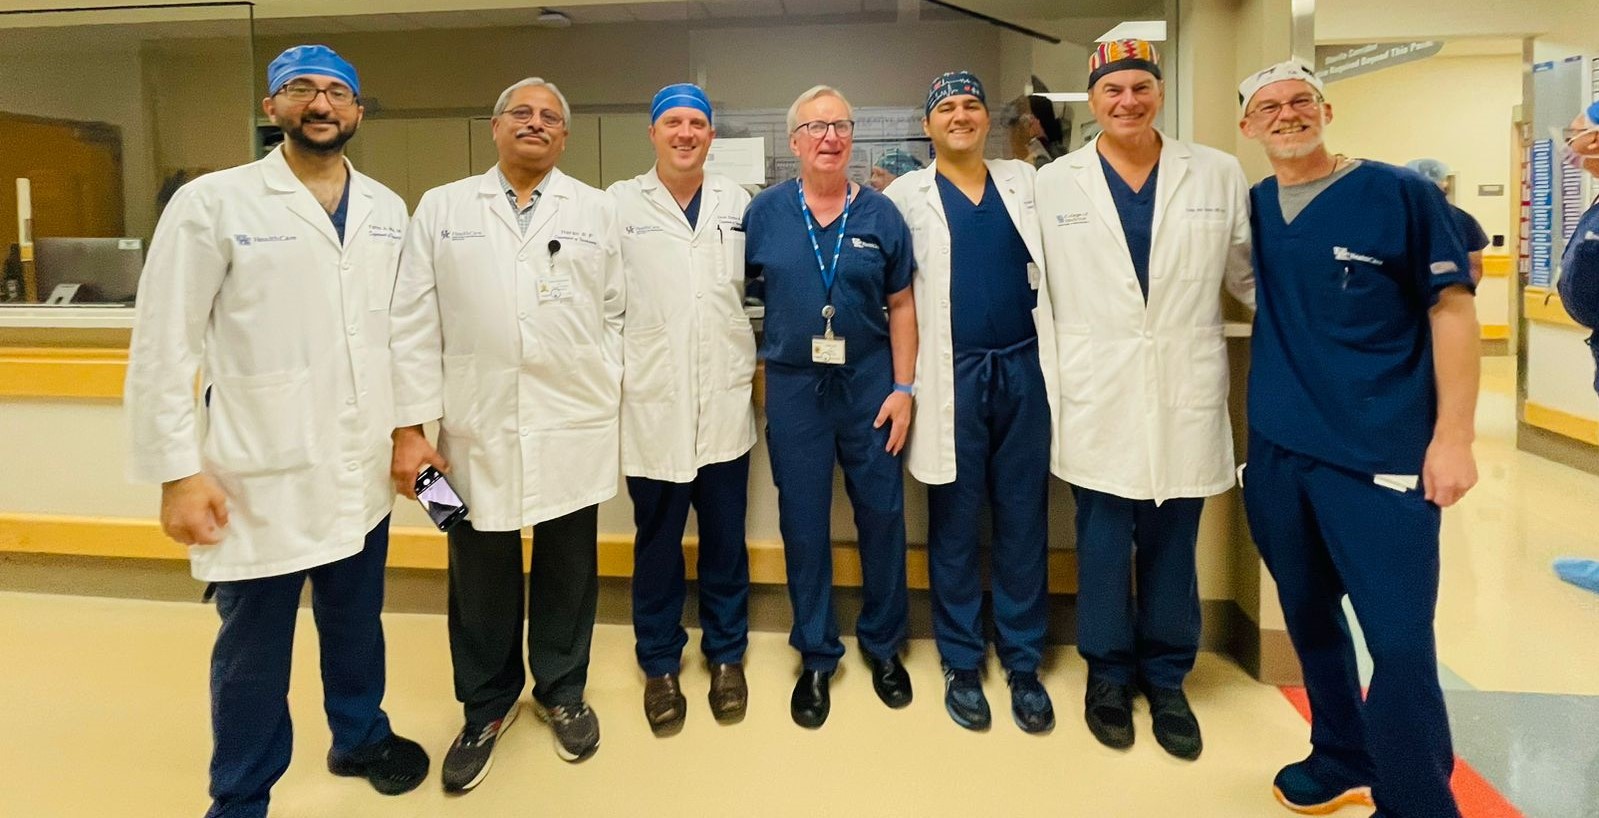 Dr. Tibbs and the faculty on his last day of surgery